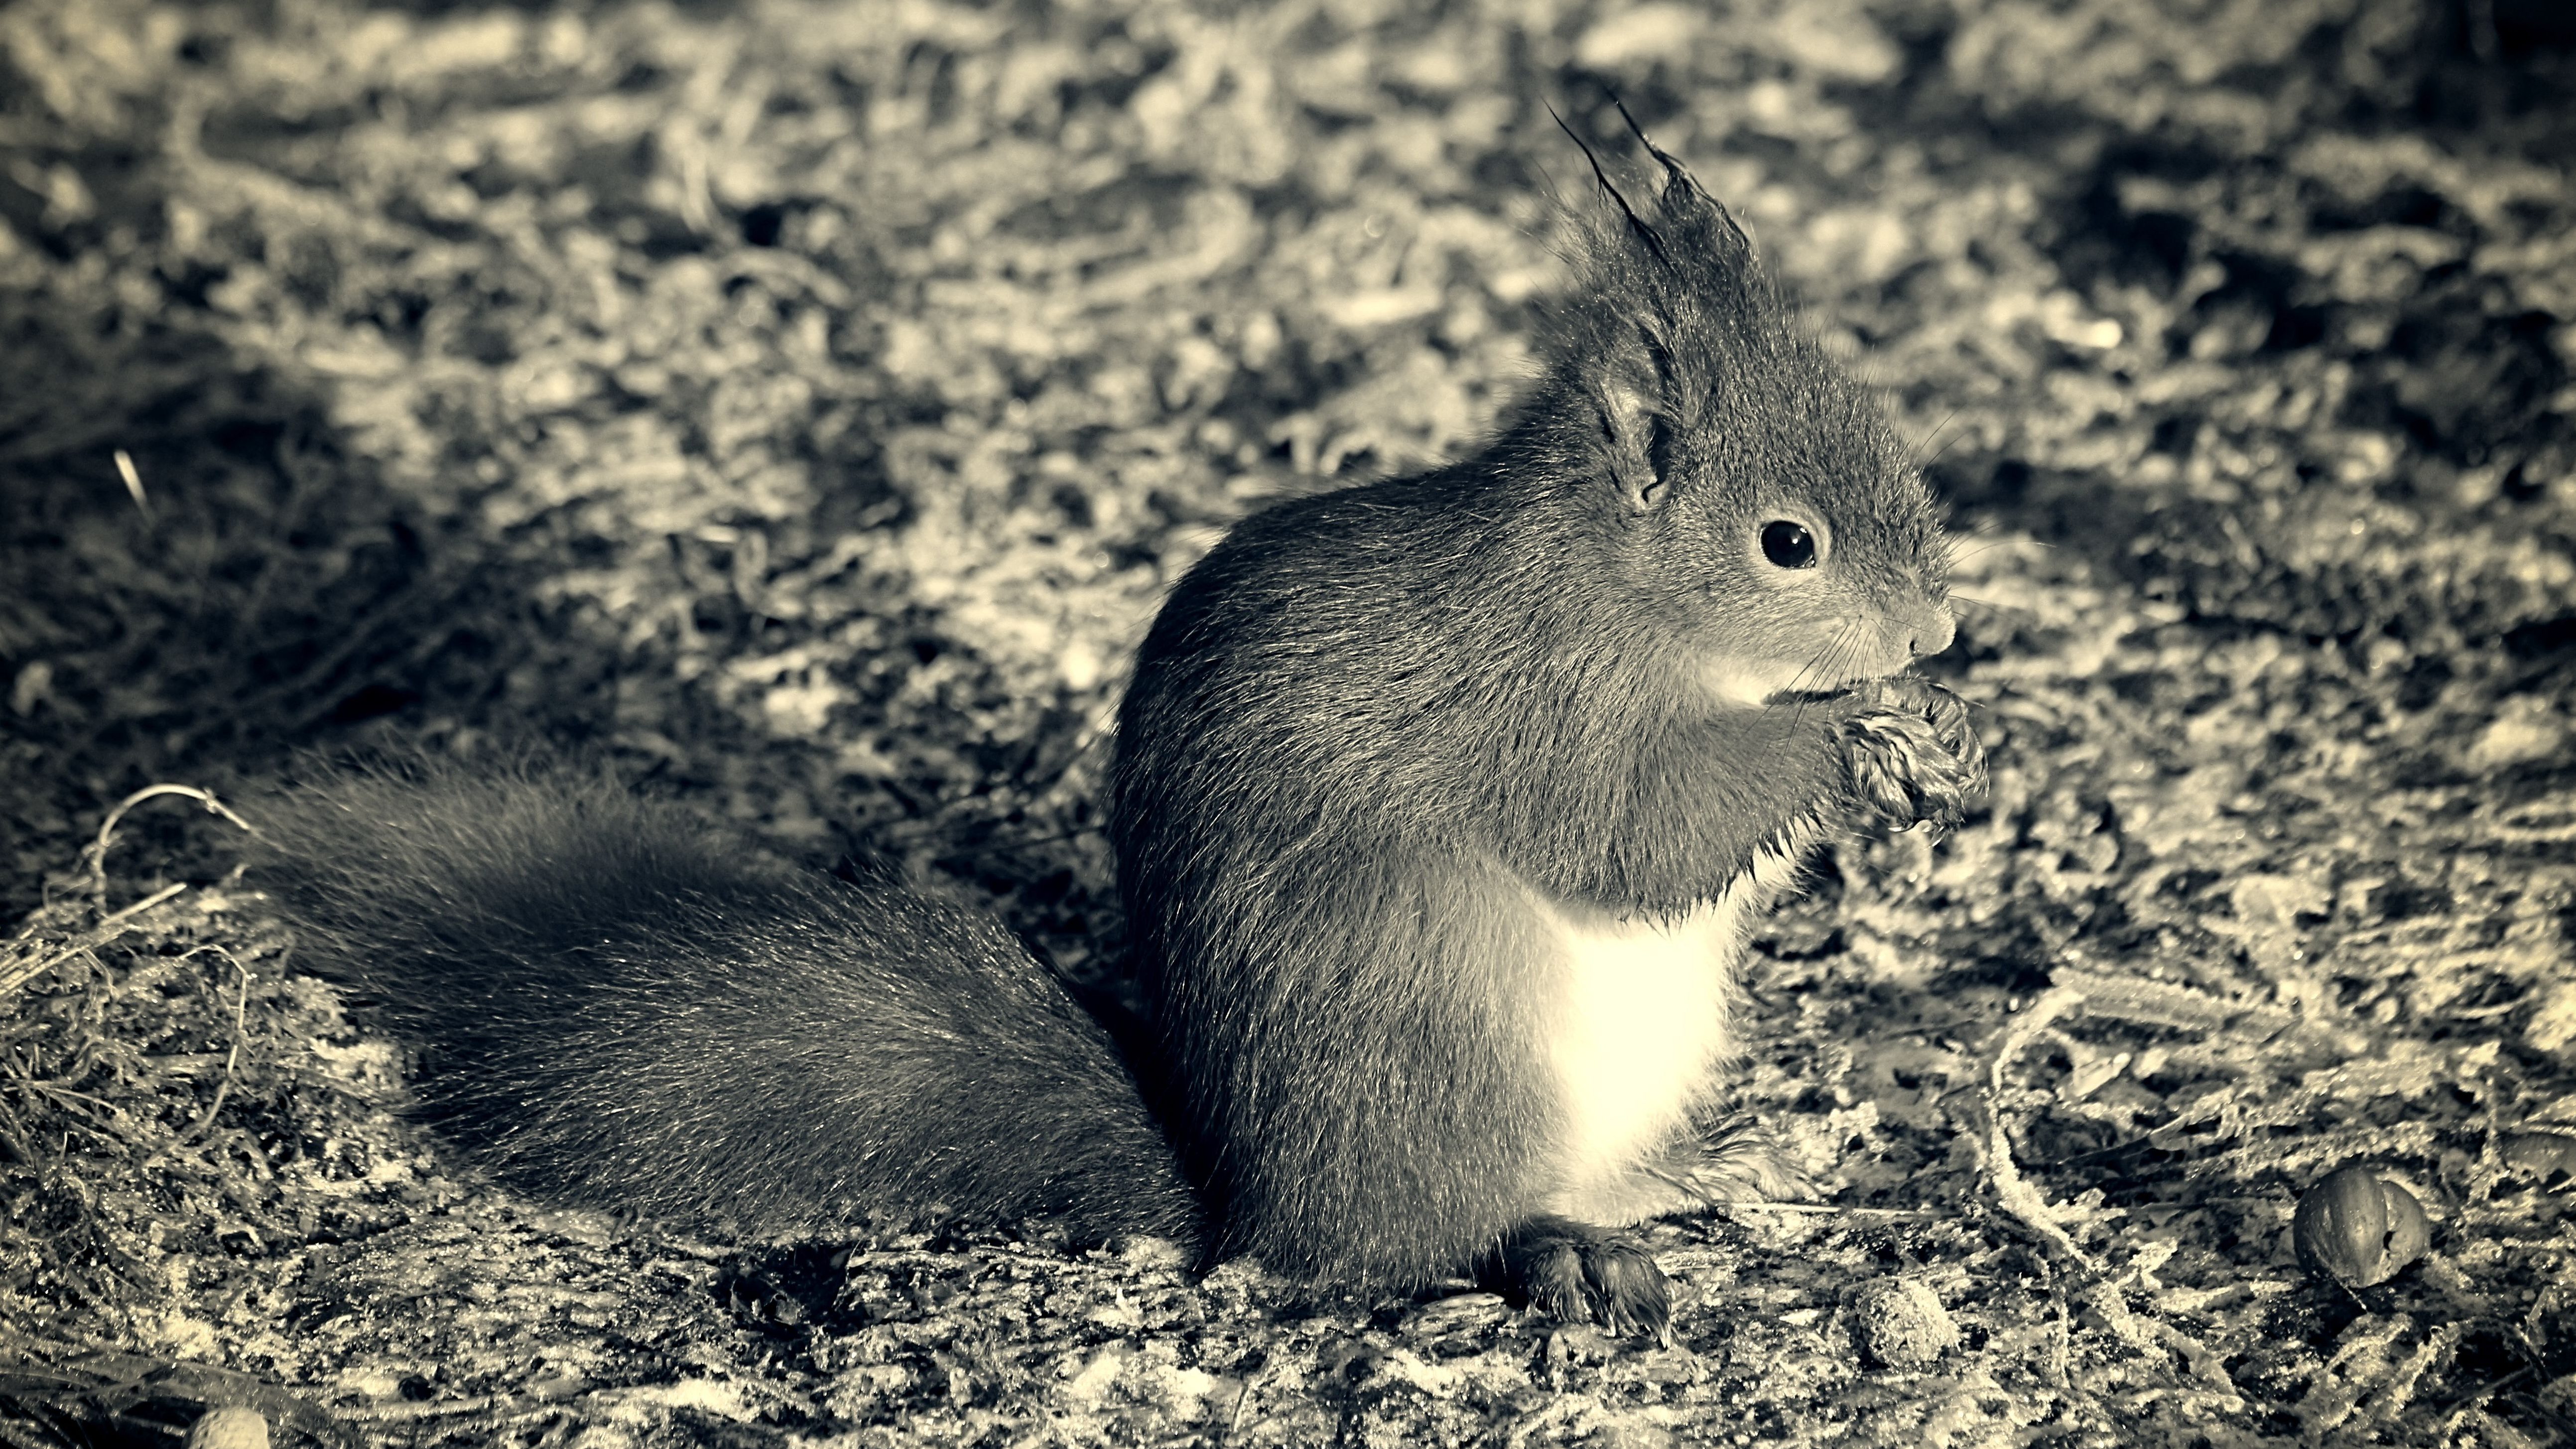 Black and white photograph of a red squirrel sitting nibbling on a nut. Taken in Fife, Scotland 